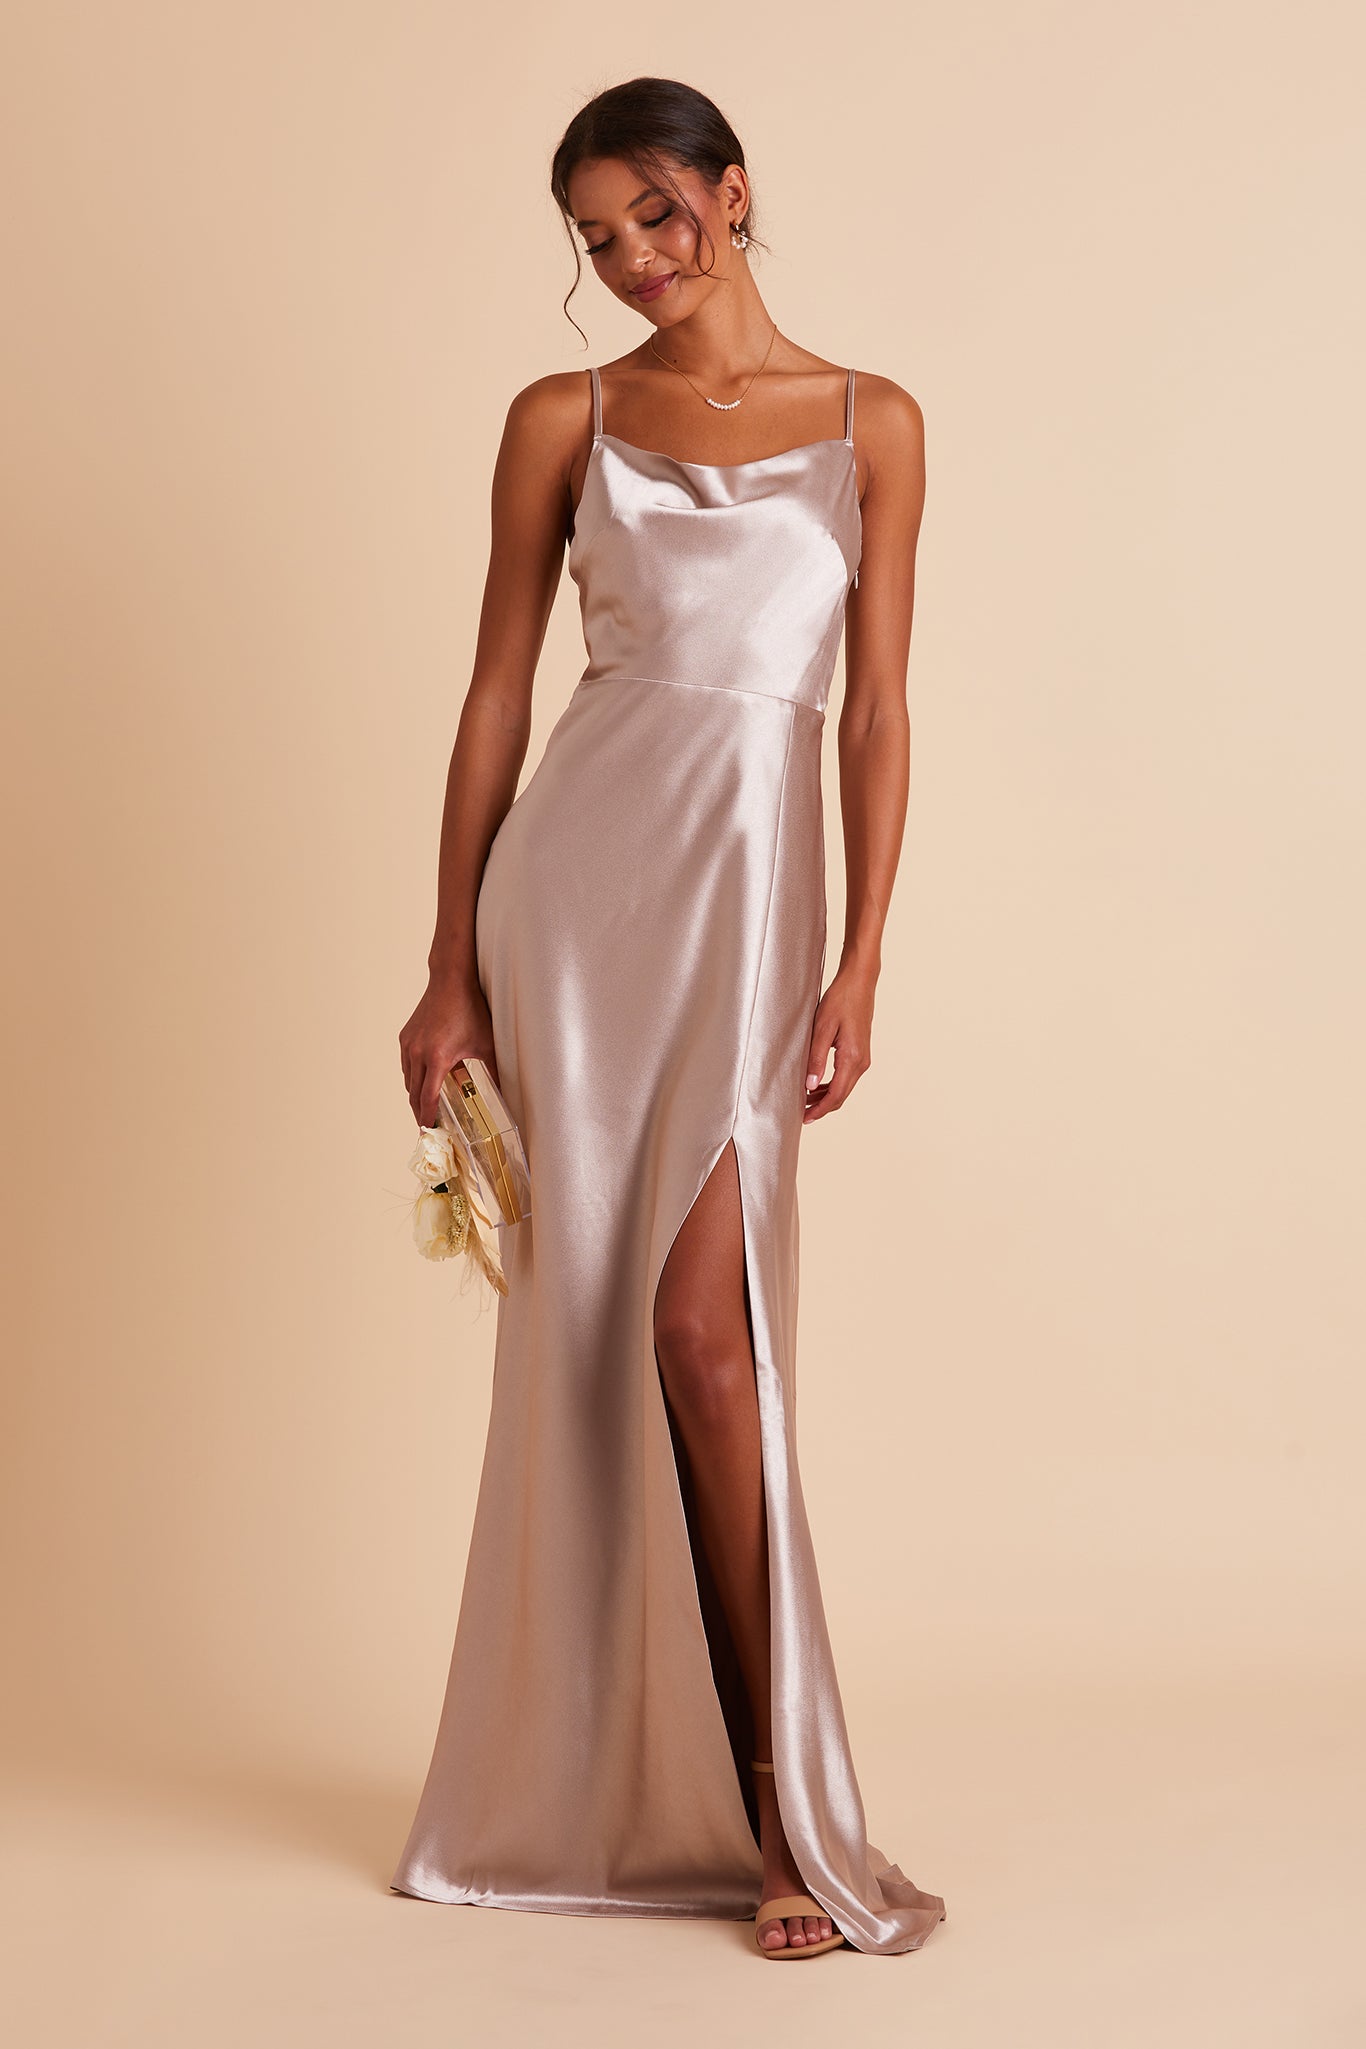 Front view of the Lisa Long Dress in taupe satin shows a slender model with a medium skin tone wearing a lightly draped cowl neck bodice with spaghetti straps and a floor length flared dress with a slit. 